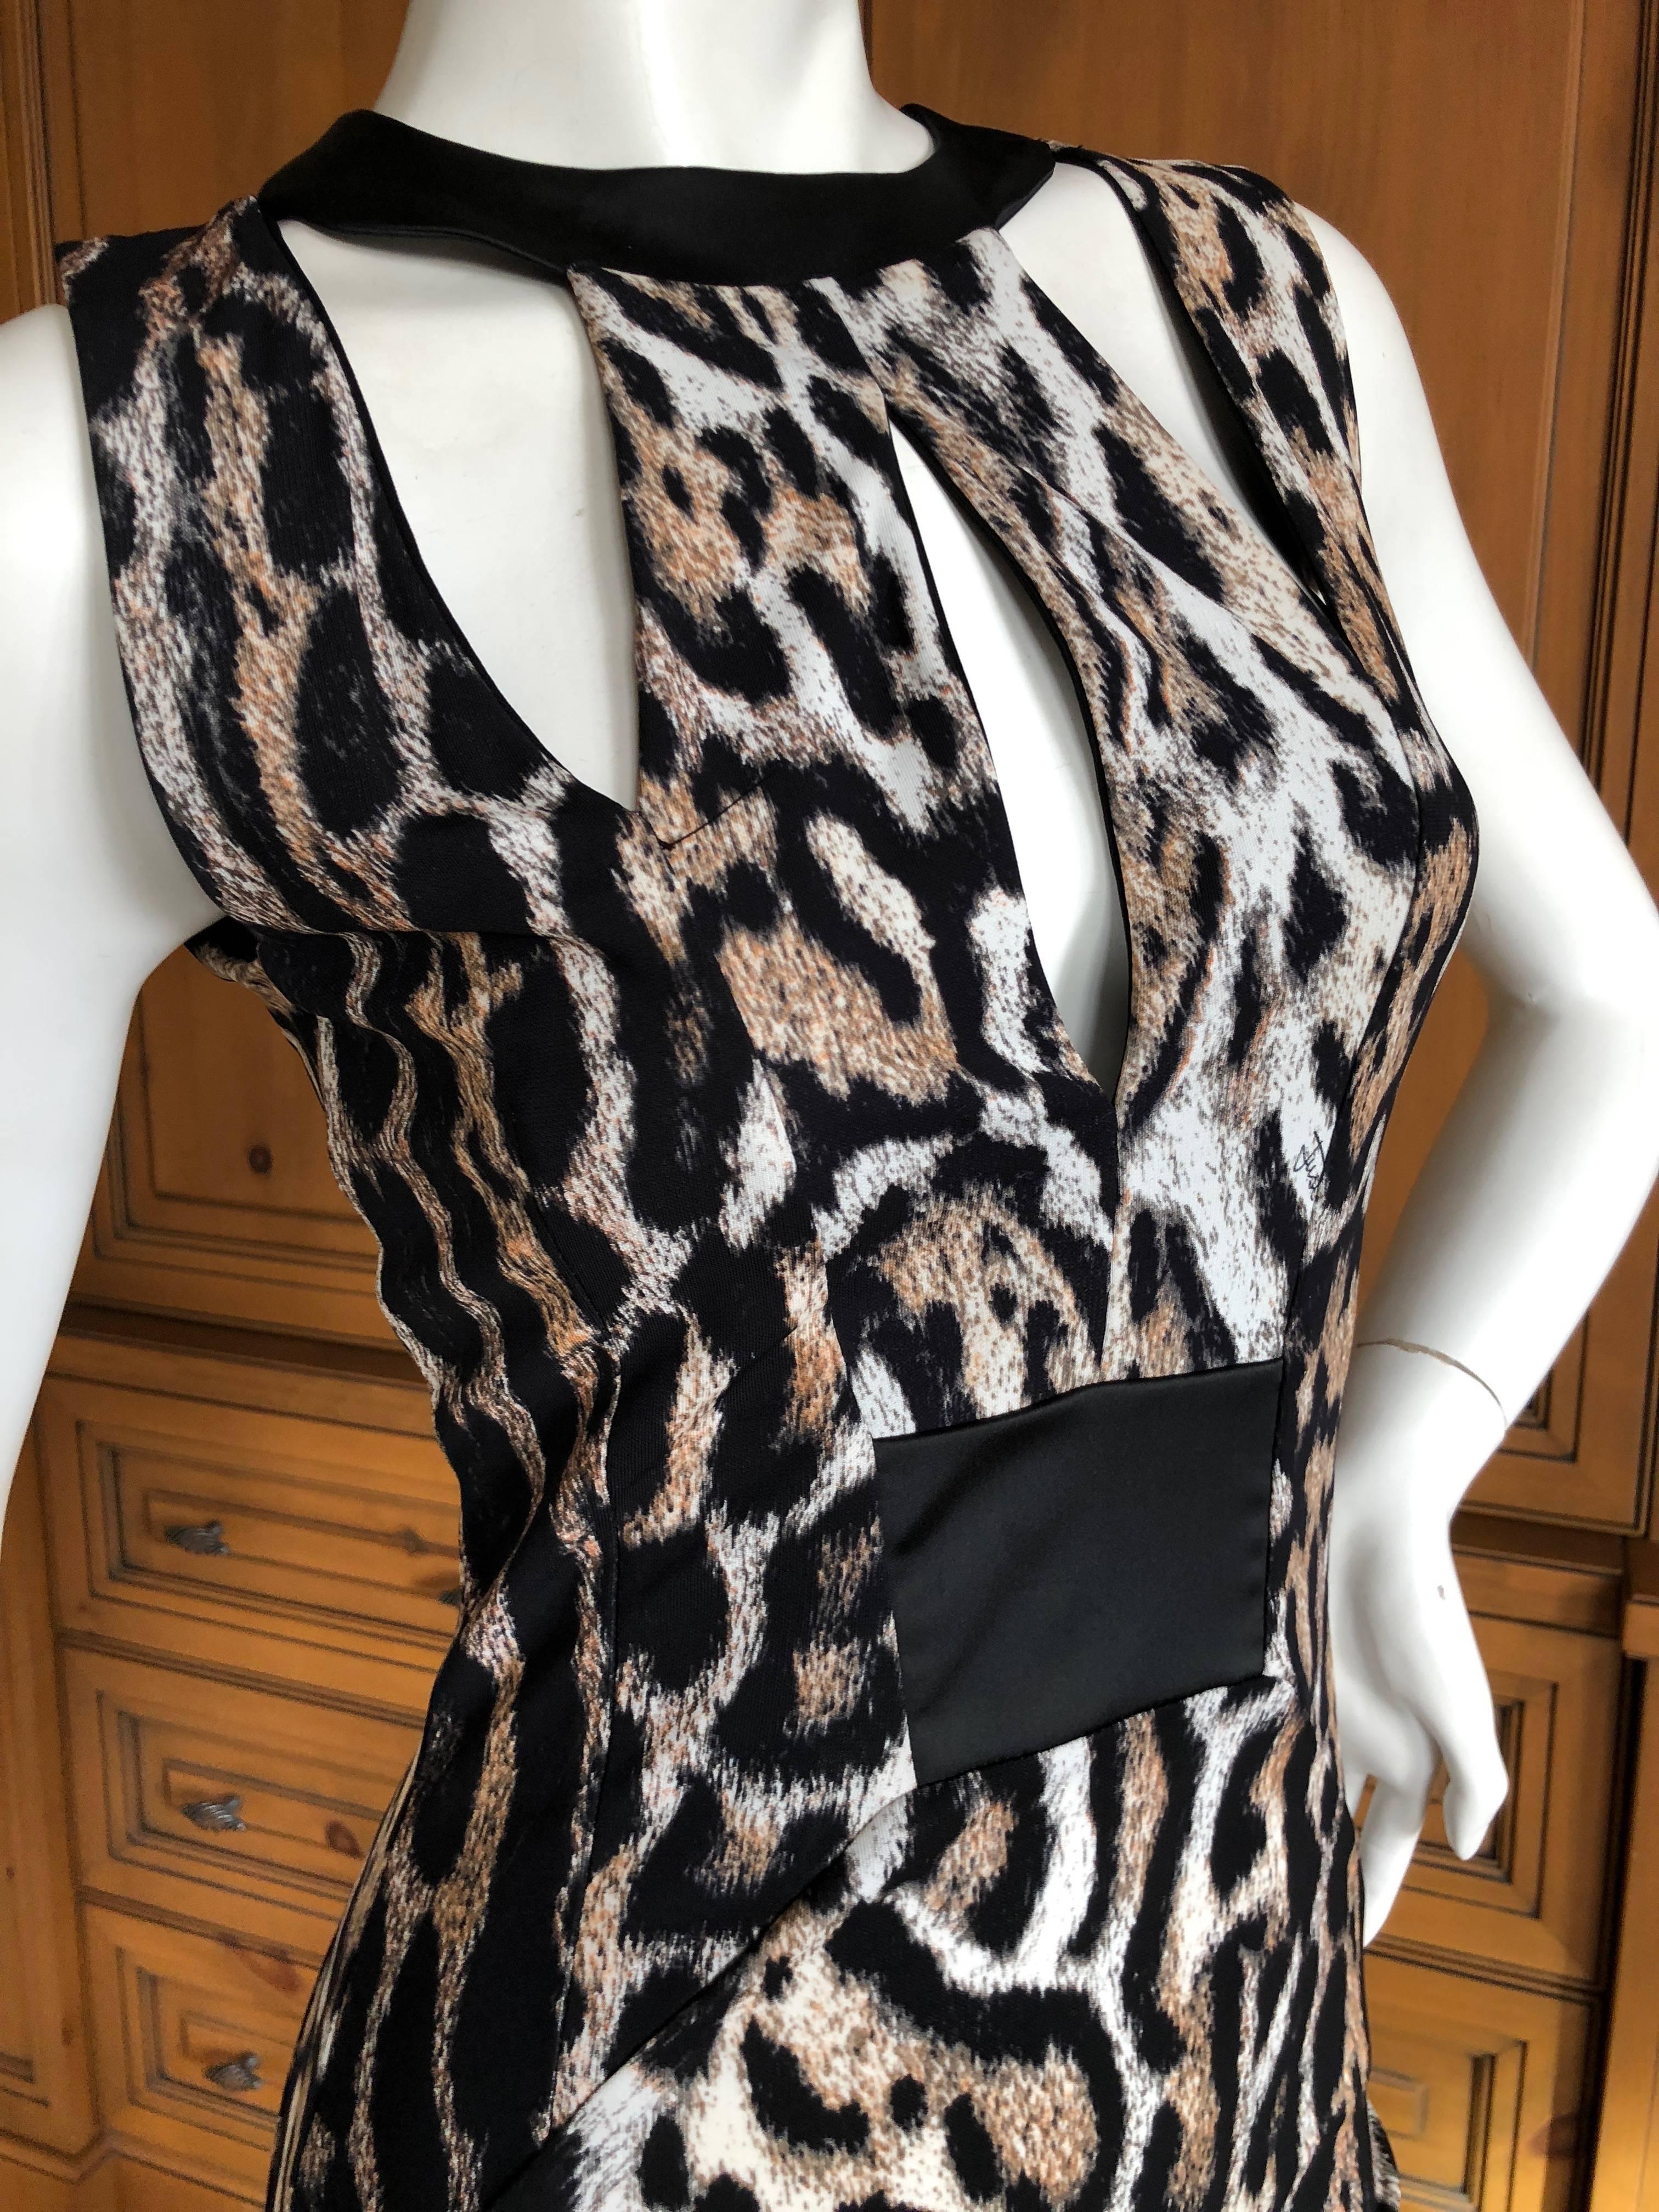 Women's or Men's Roberto Cavalli Long Leopard Dress with Cut Outs for Just Cavalli For Sale